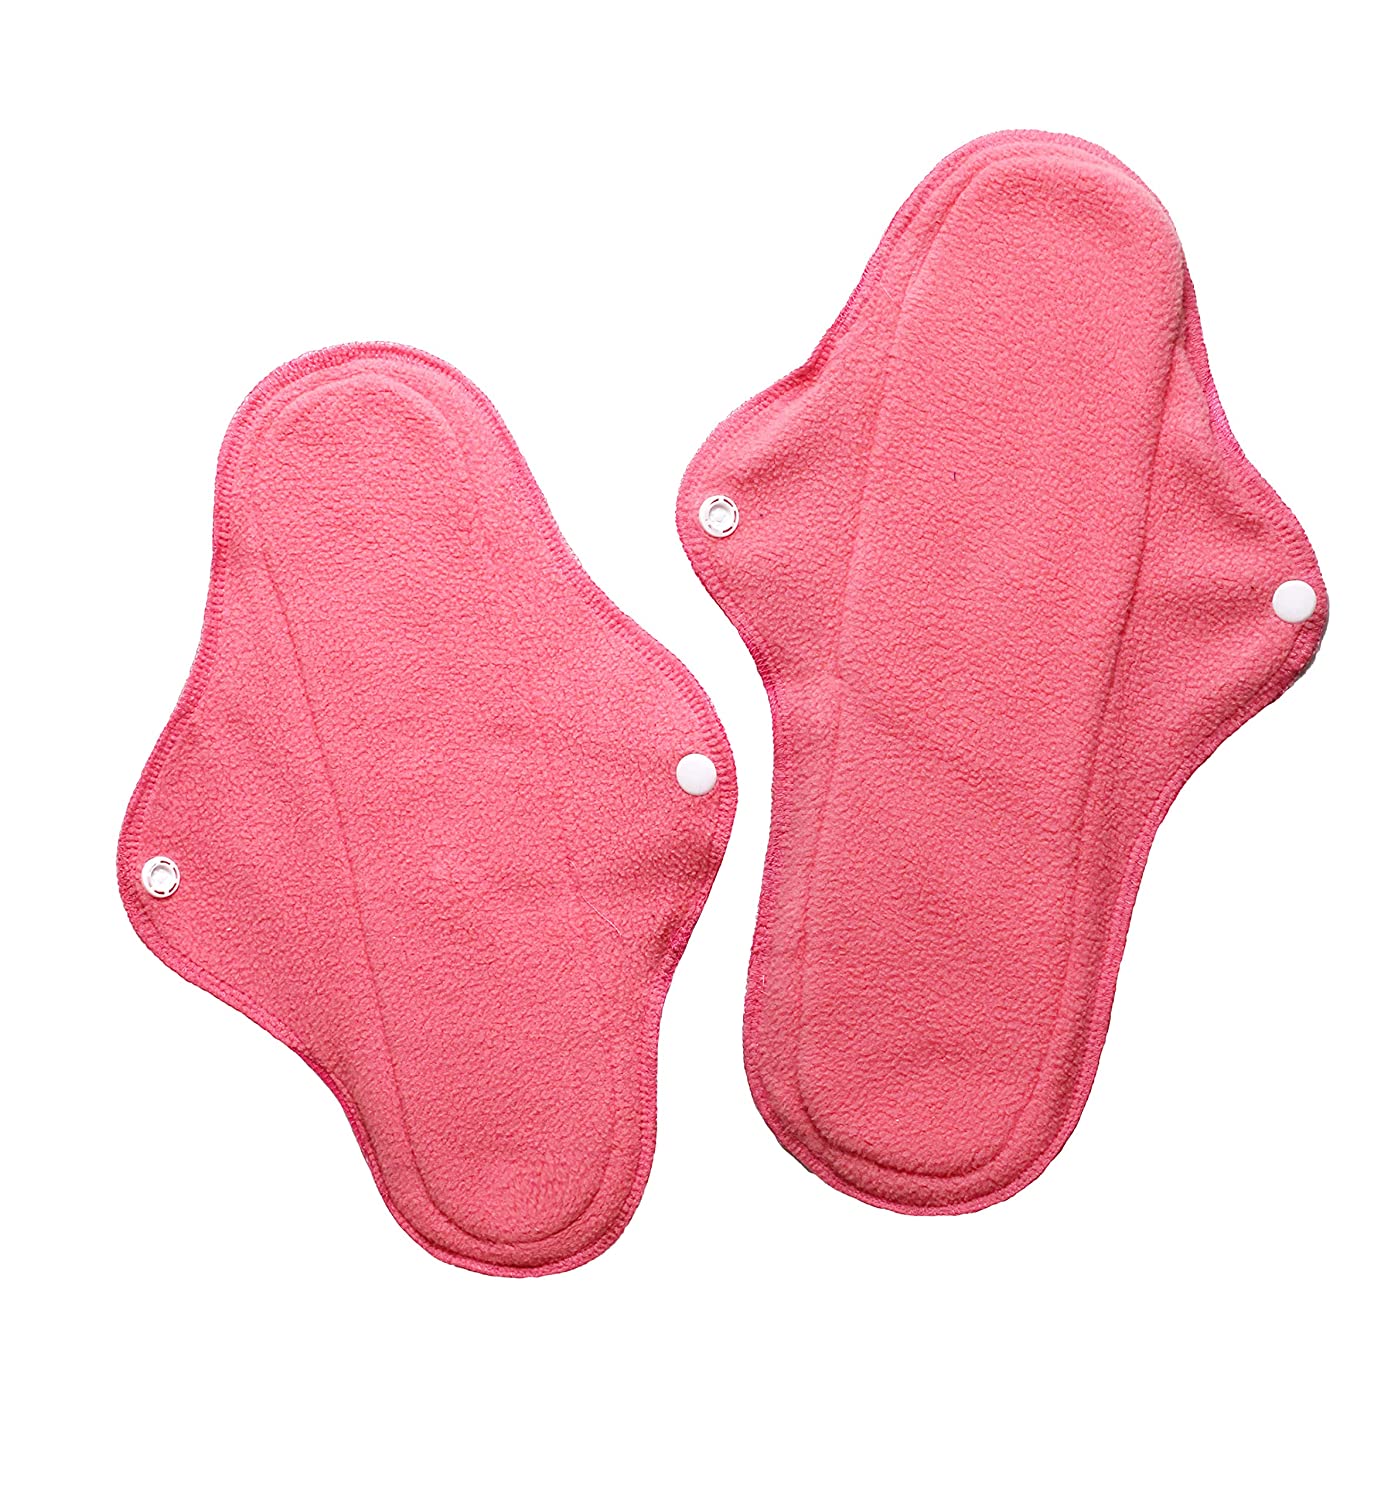 Reusable Cloth Pads - Pack of 8 - Pink –